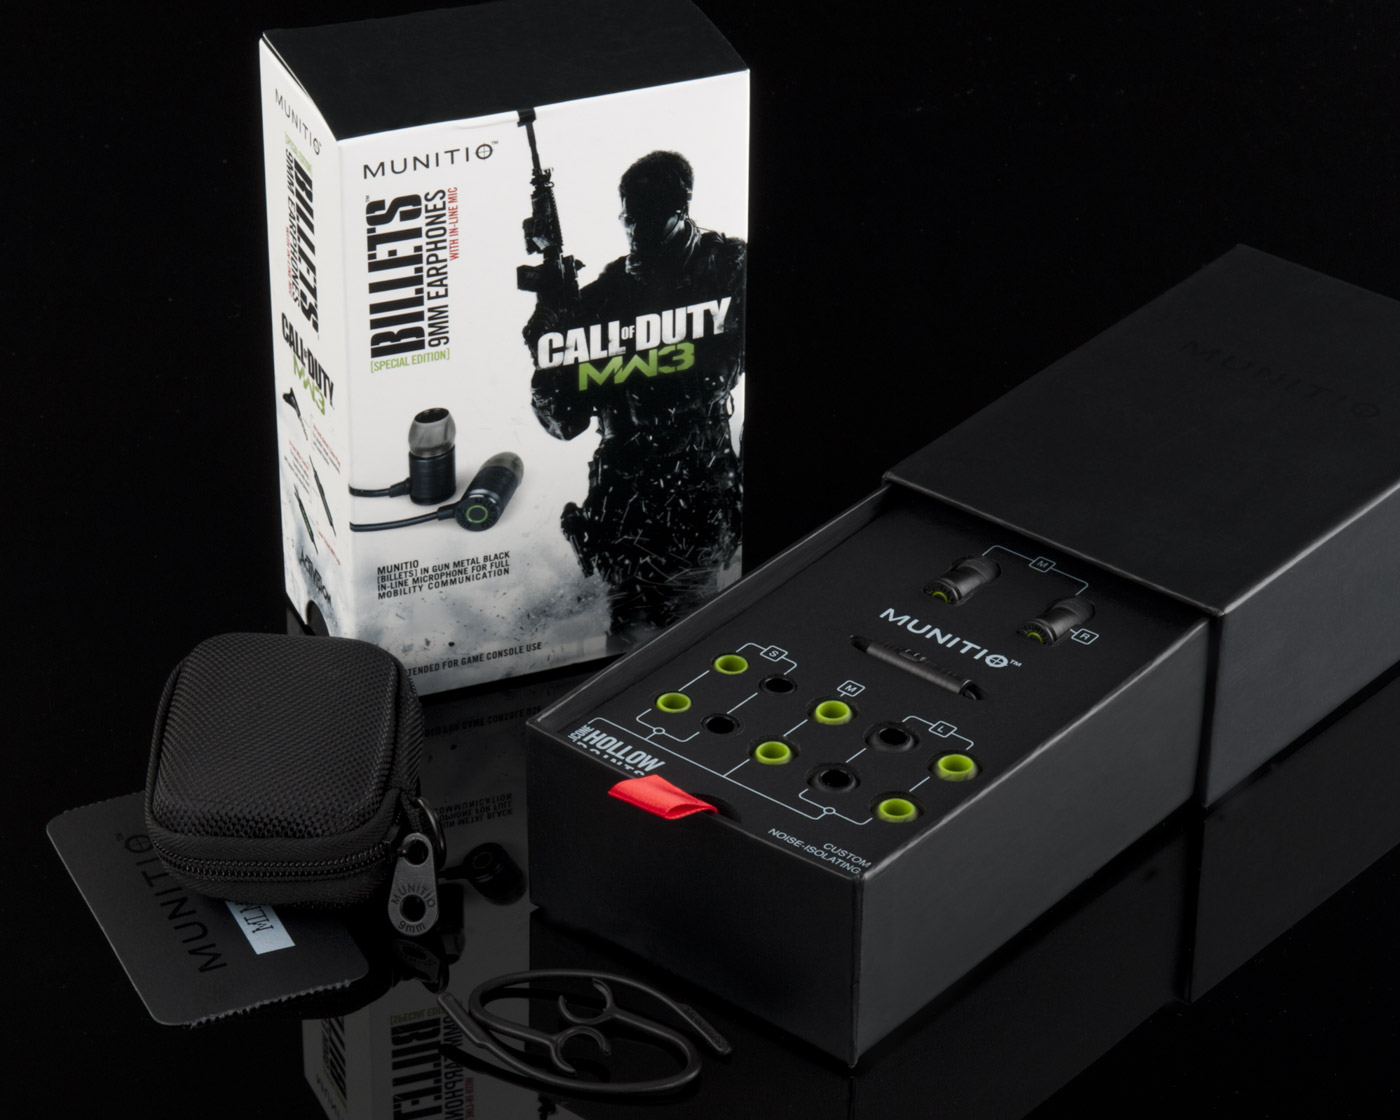 MUNITIO Billets MW3 green packaging - Special Edition Call of Duty MW3 Billets